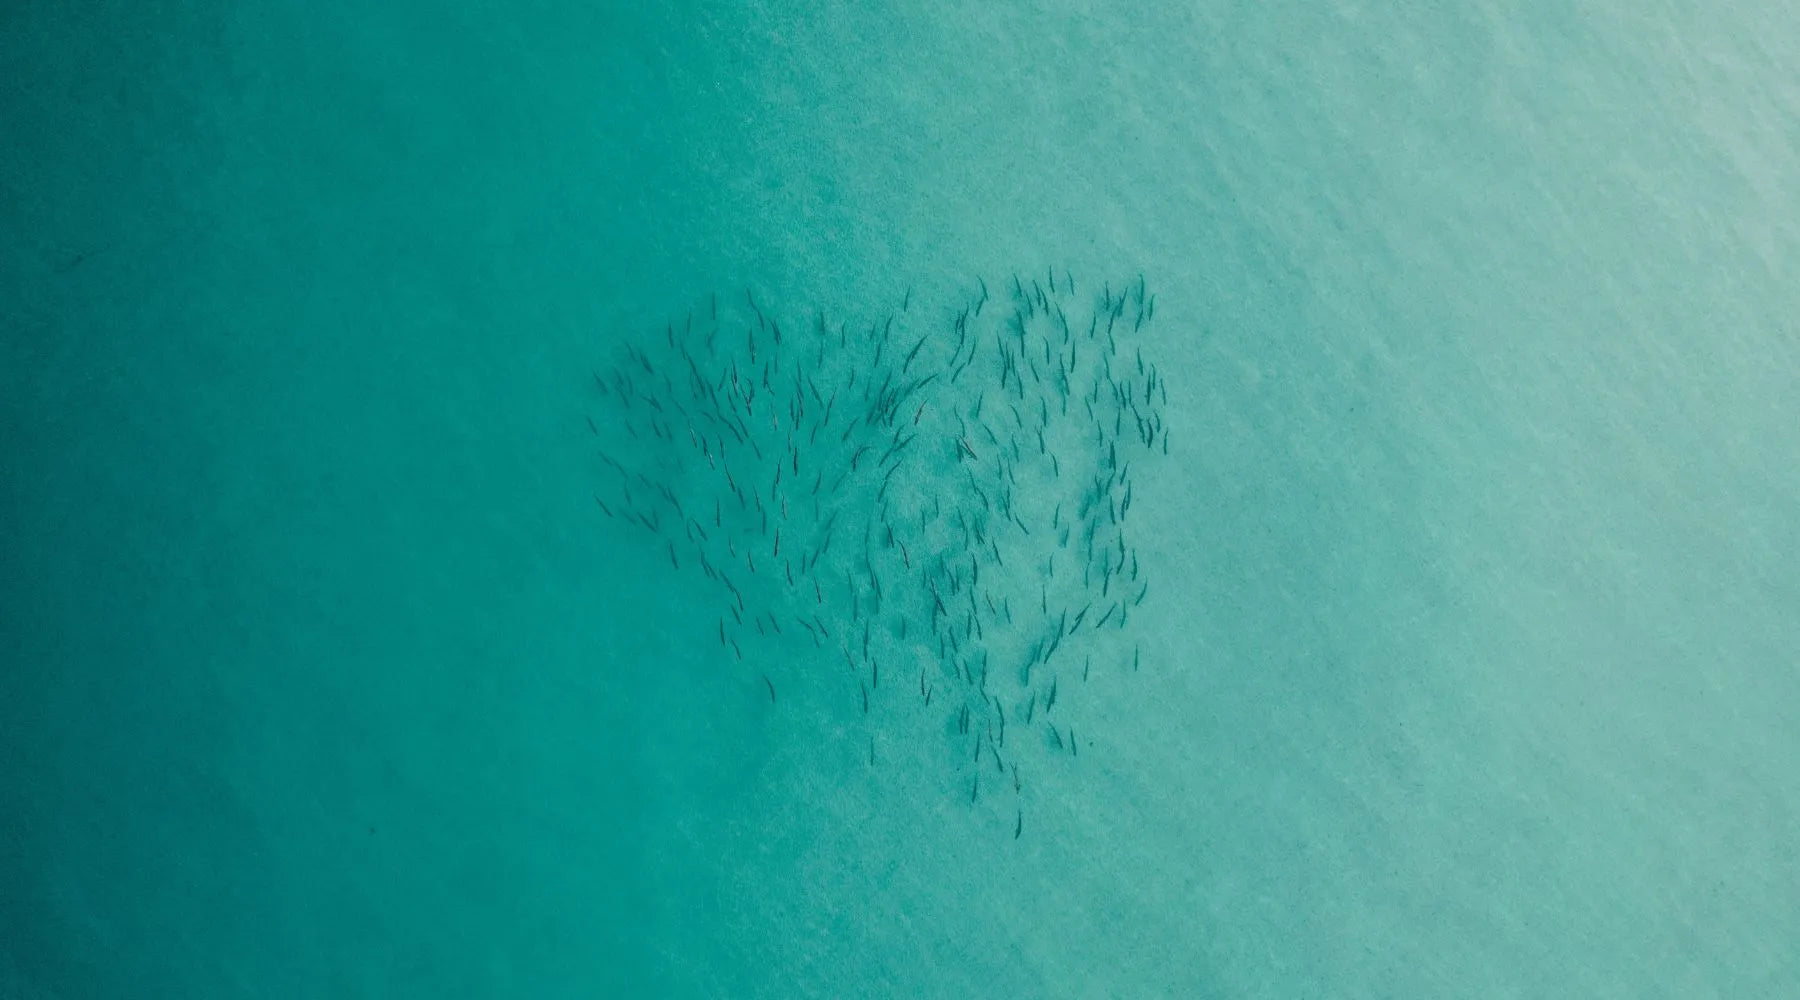 Fish in sea from above